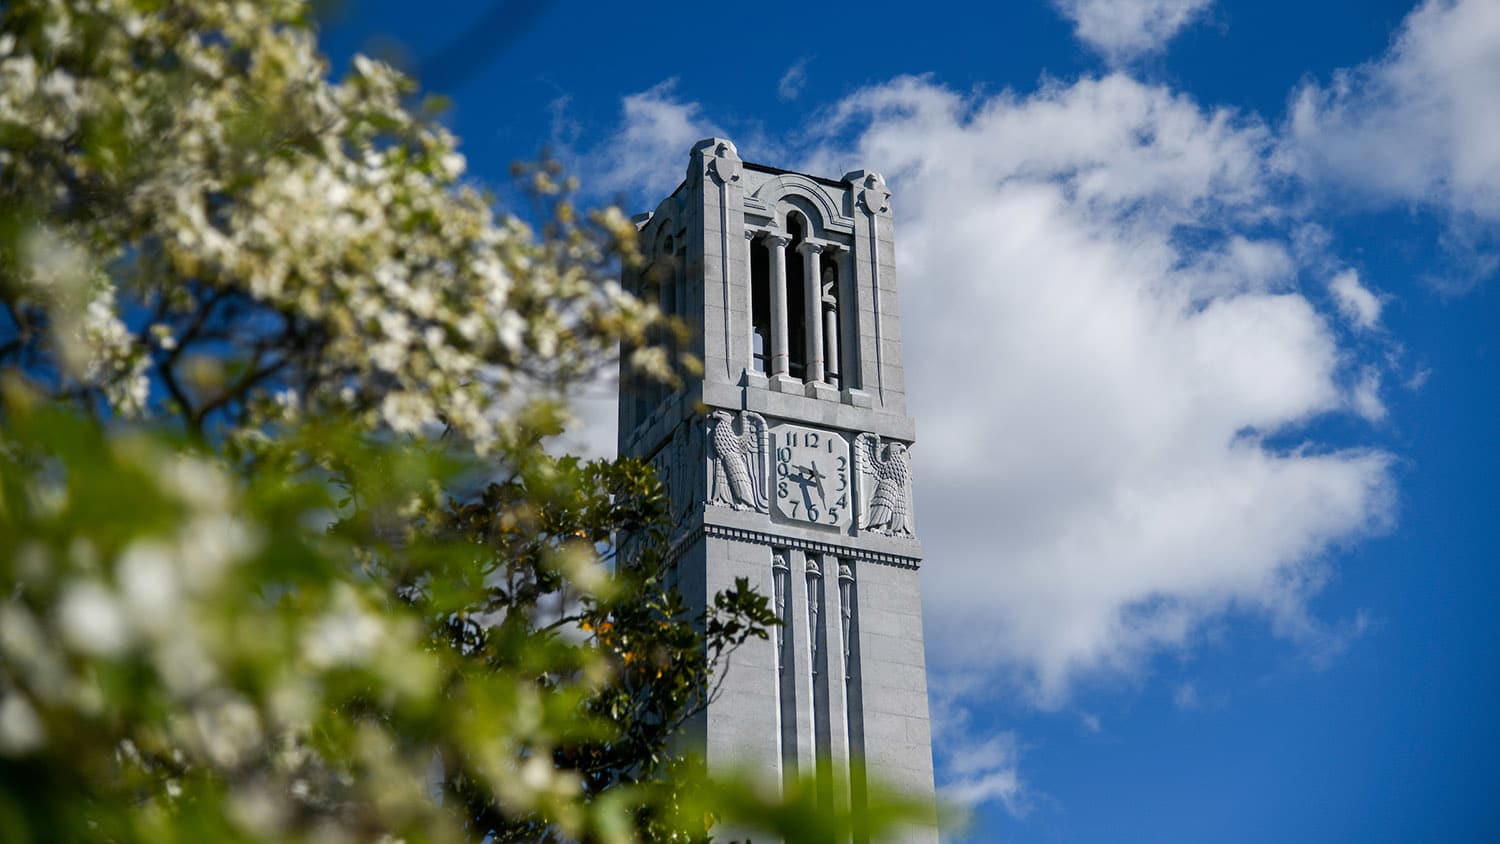 The NC State Belltower against a blue sky, with flowering trees in the foreground